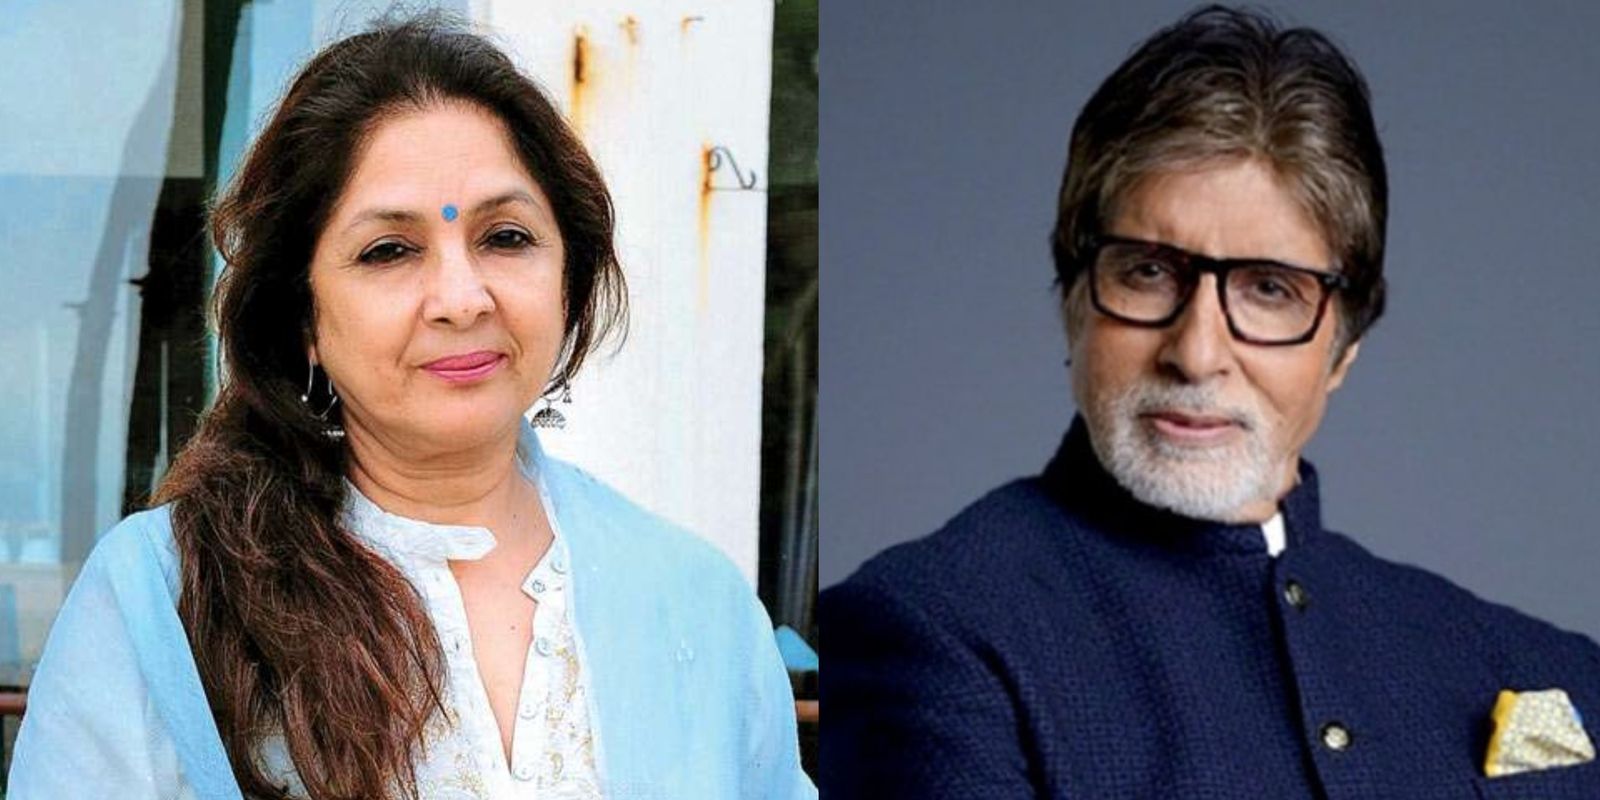 Goodbye: Neena Gupta Feels Intimidated By Co-Star Amitabh Bachchan; Is Excited About Working With Him